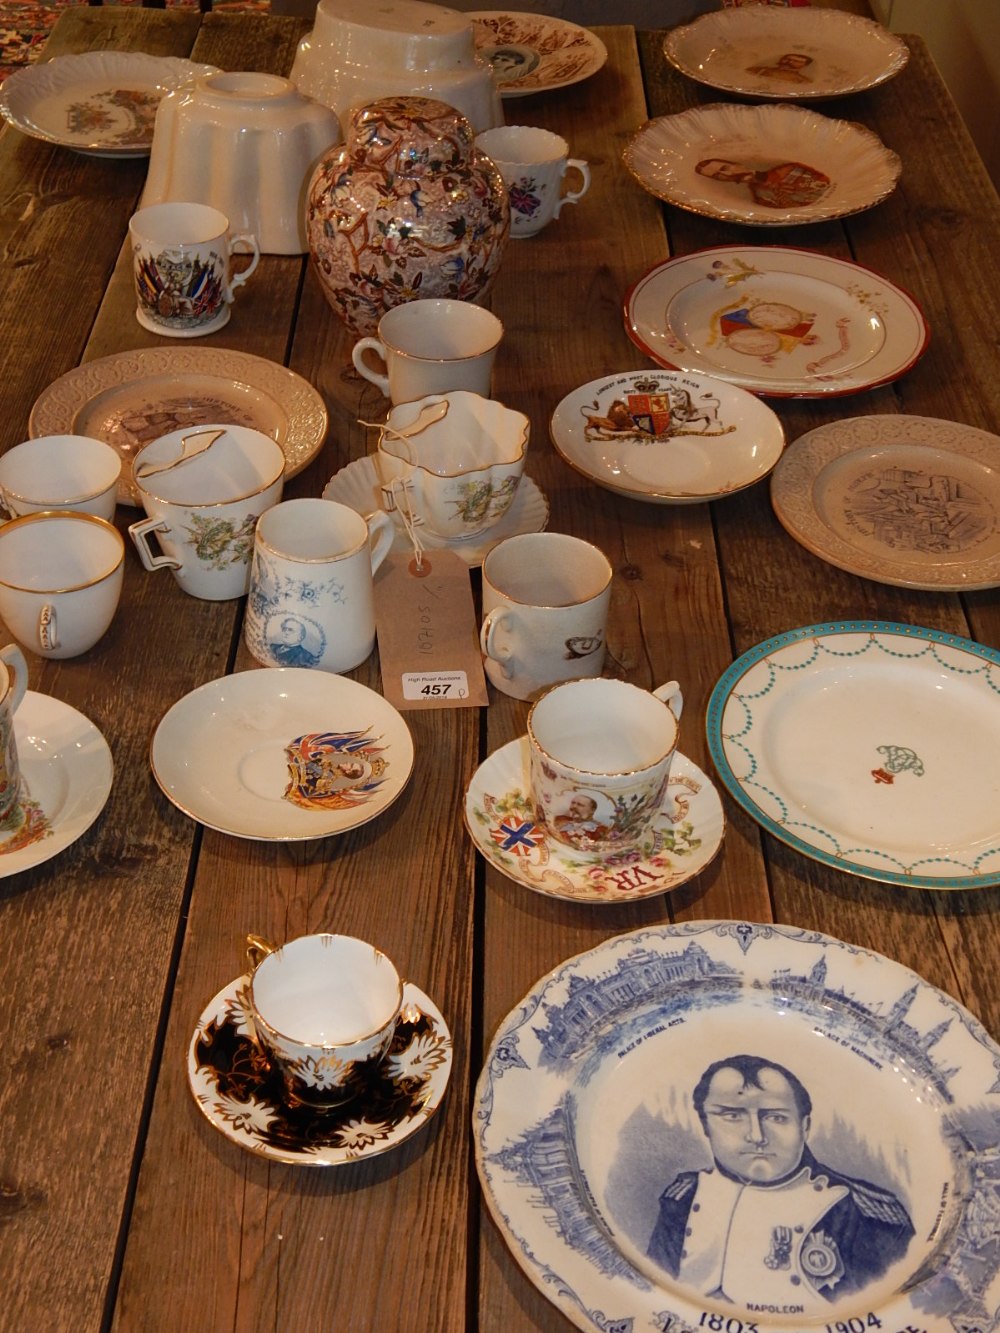 A quantity of late 19th and early 20th commemorative ceramics including Victoria and Edward VIII